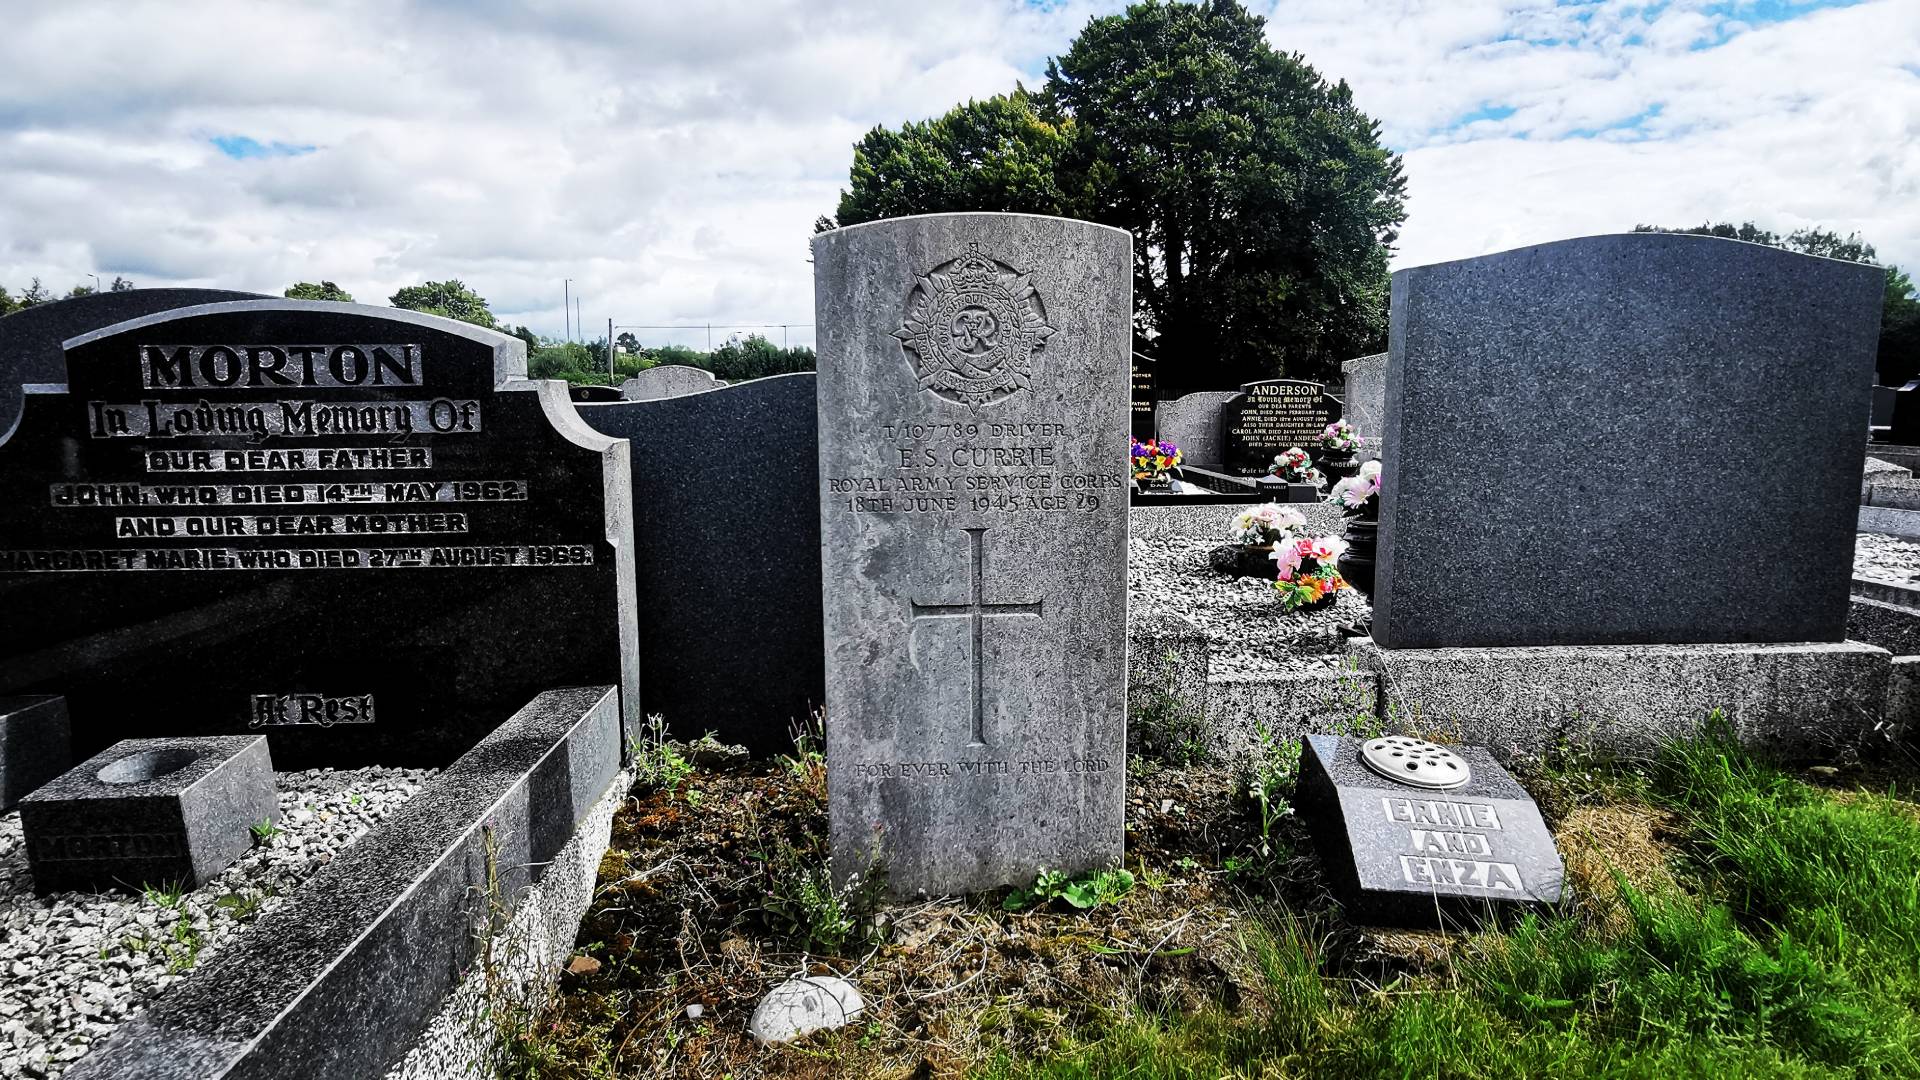 A Commonwealth War Graves headstone marks the grave of Driver Ernest Stewart Currie in Seagoe Cemetery, Portadown, Co. Armagh.